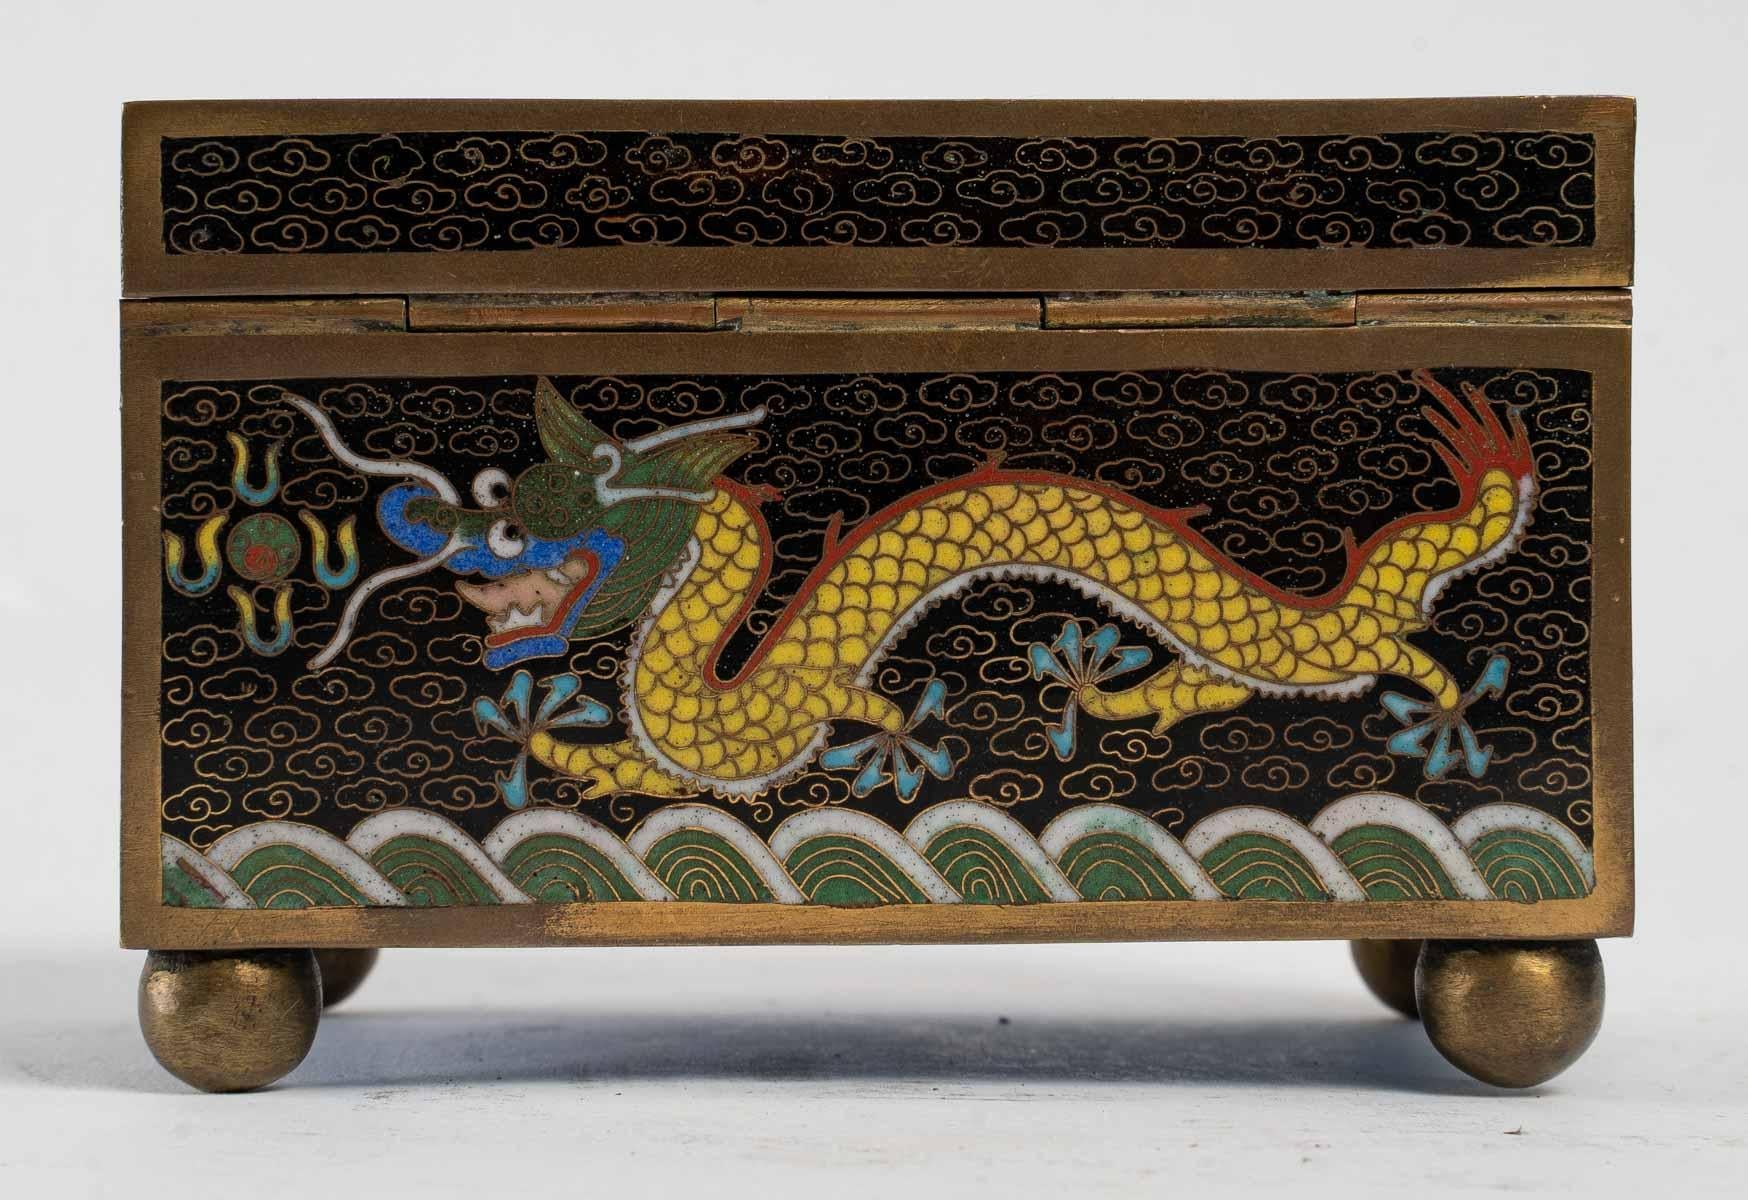 Enameled Metal Box Decorated with Cloisonne Enamels